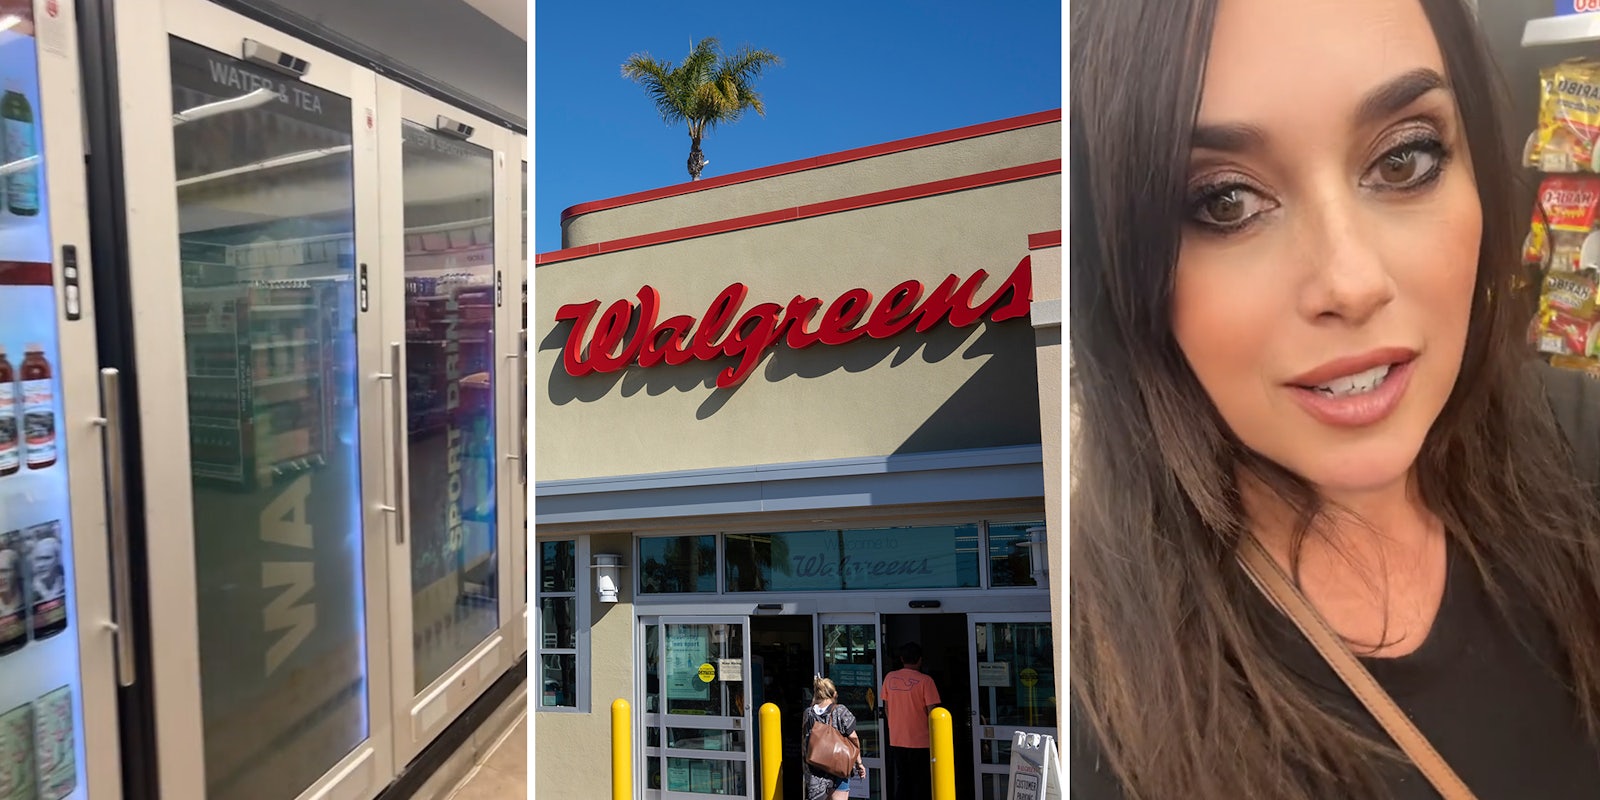 Walgreens customer issues warning after encountering new refrigerators that scan